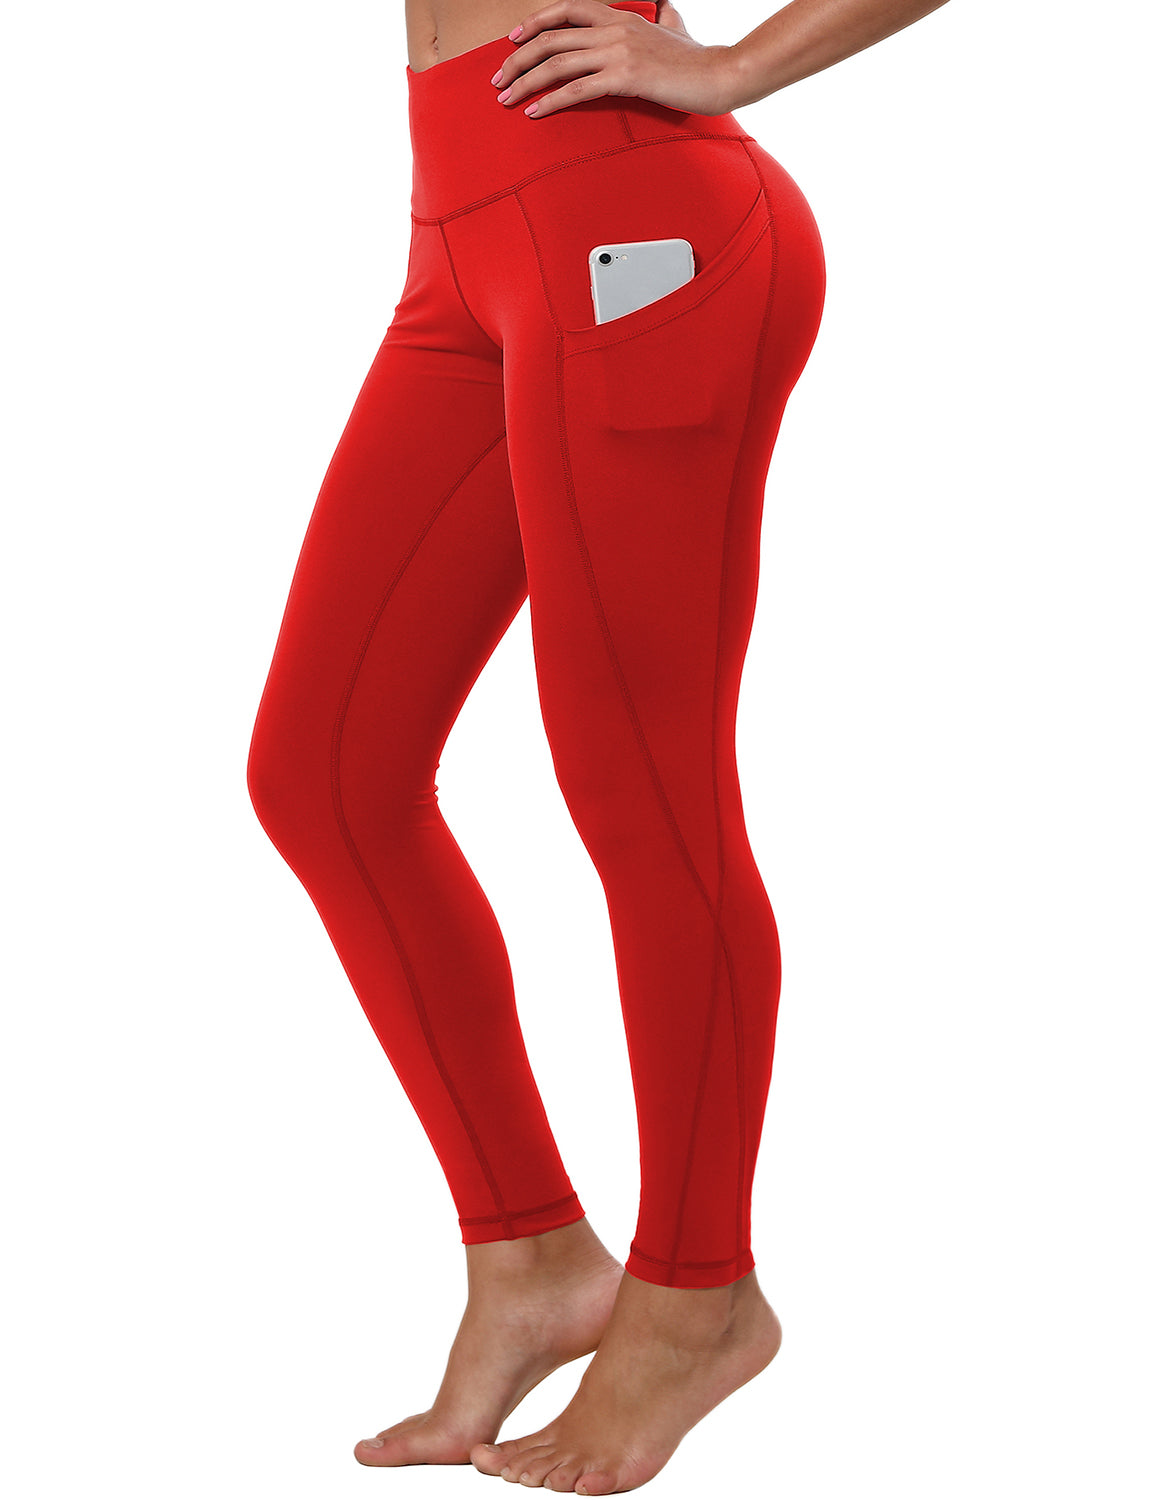 High Waist Side Pockets Yoga Pants scarlet 75% Nylon, 25% Spandex Fabric doesn't attract lint easily 4-way stretch No see-through Moisture-wicking Tummy control Inner pocket